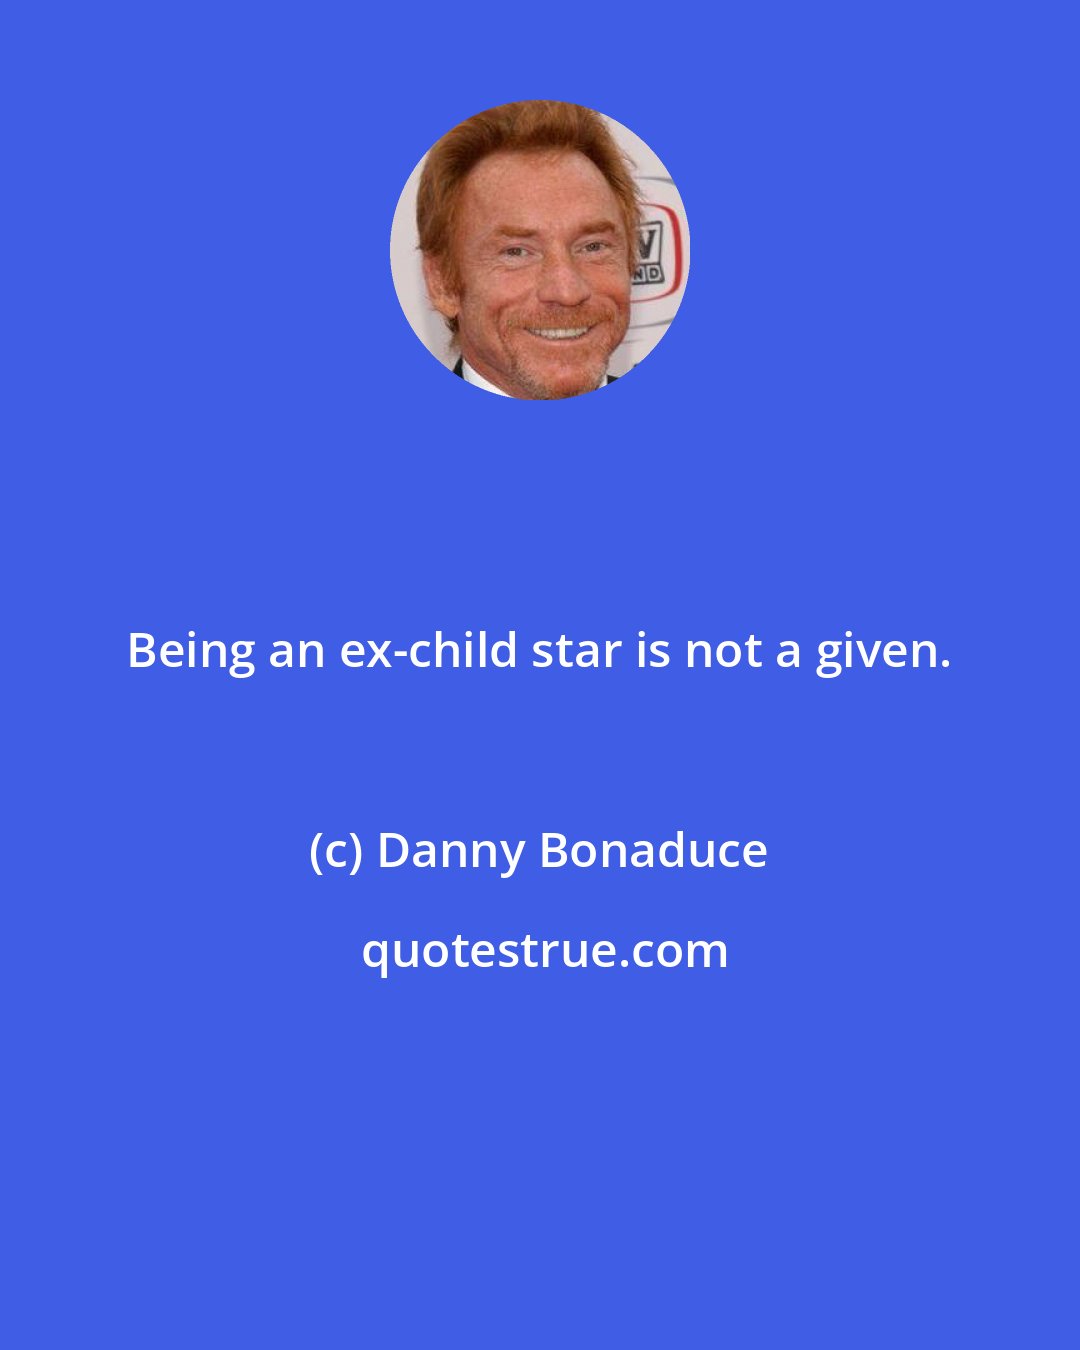 Danny Bonaduce: Being an ex-child star is not a given.